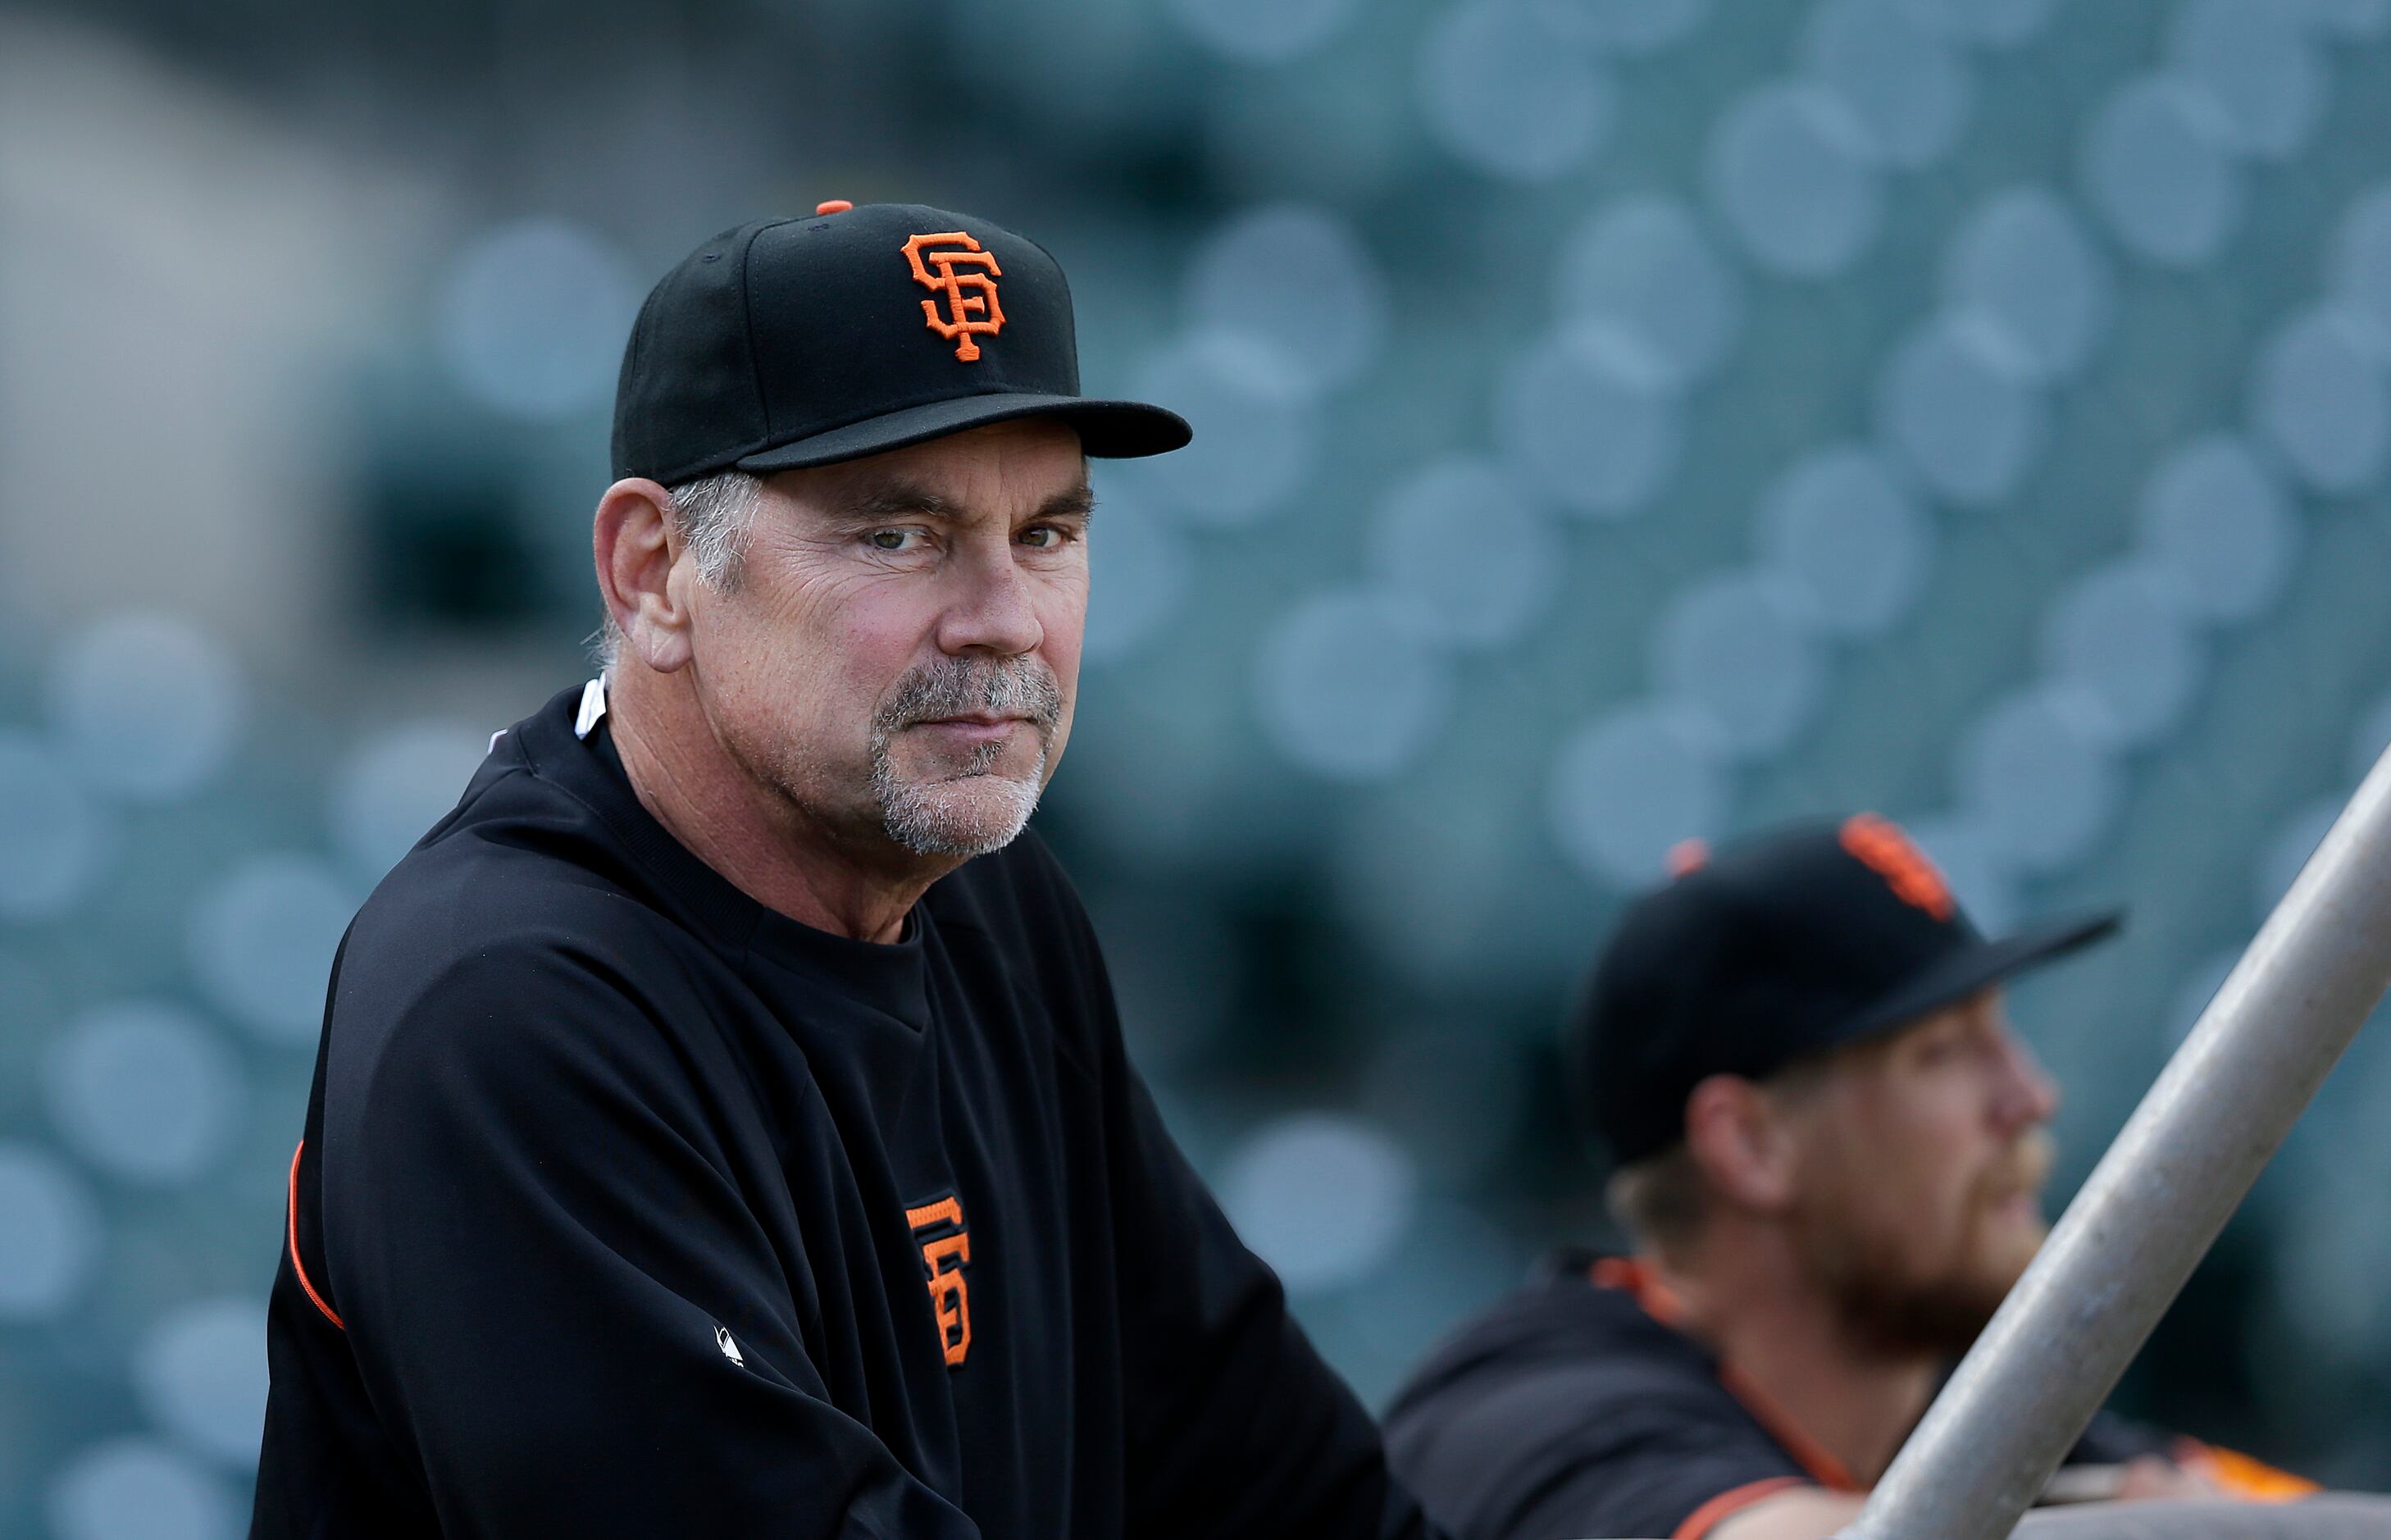 The Rangers just got relevant by hiring proven winner Bruce Bochy